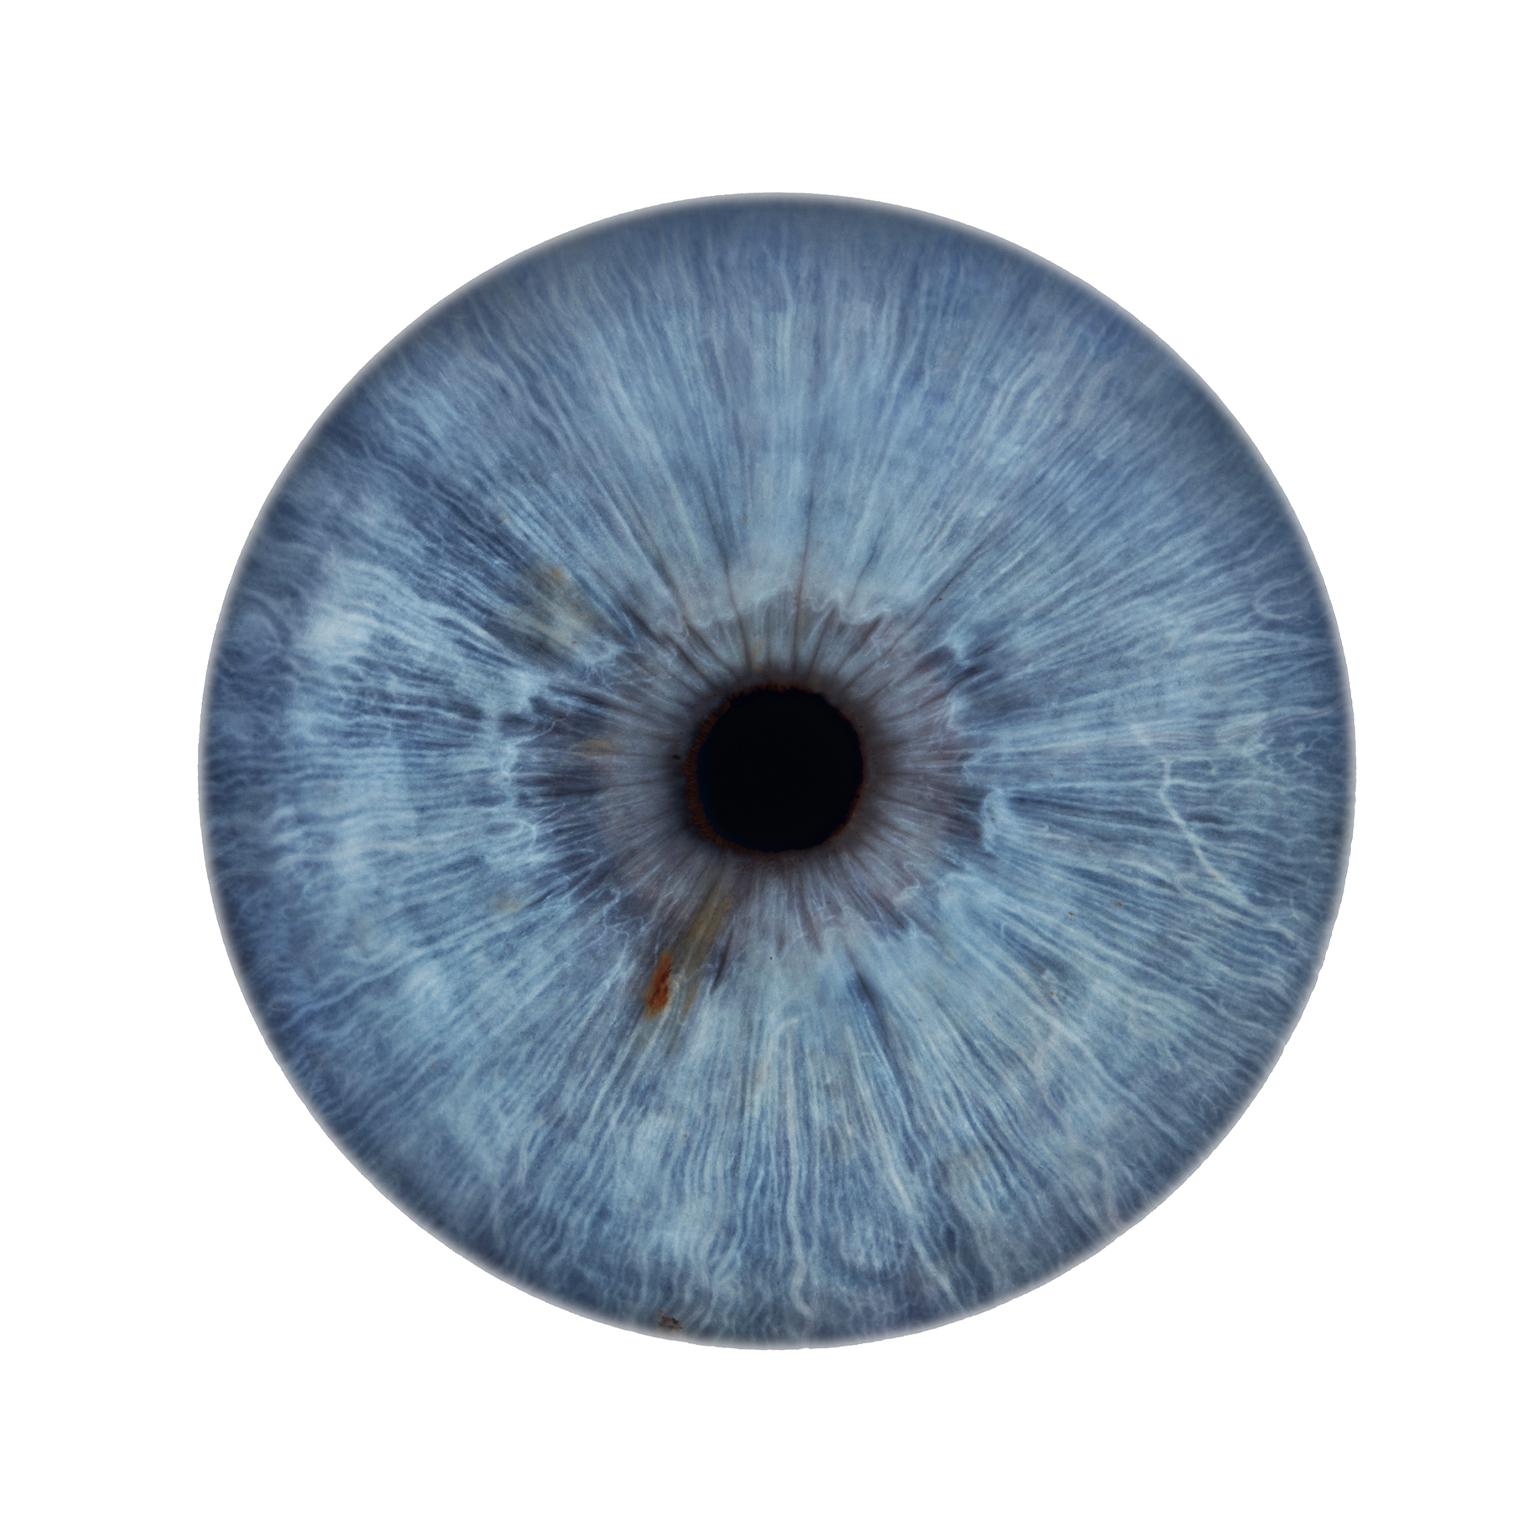 a mesmerizing sea of abstract grey blue and aqua water color tones, from an ongoing photography project since the late 1990s, capturing the details of the human iris and a pupil's unique abstractions

Iris V by Frank Schott

45